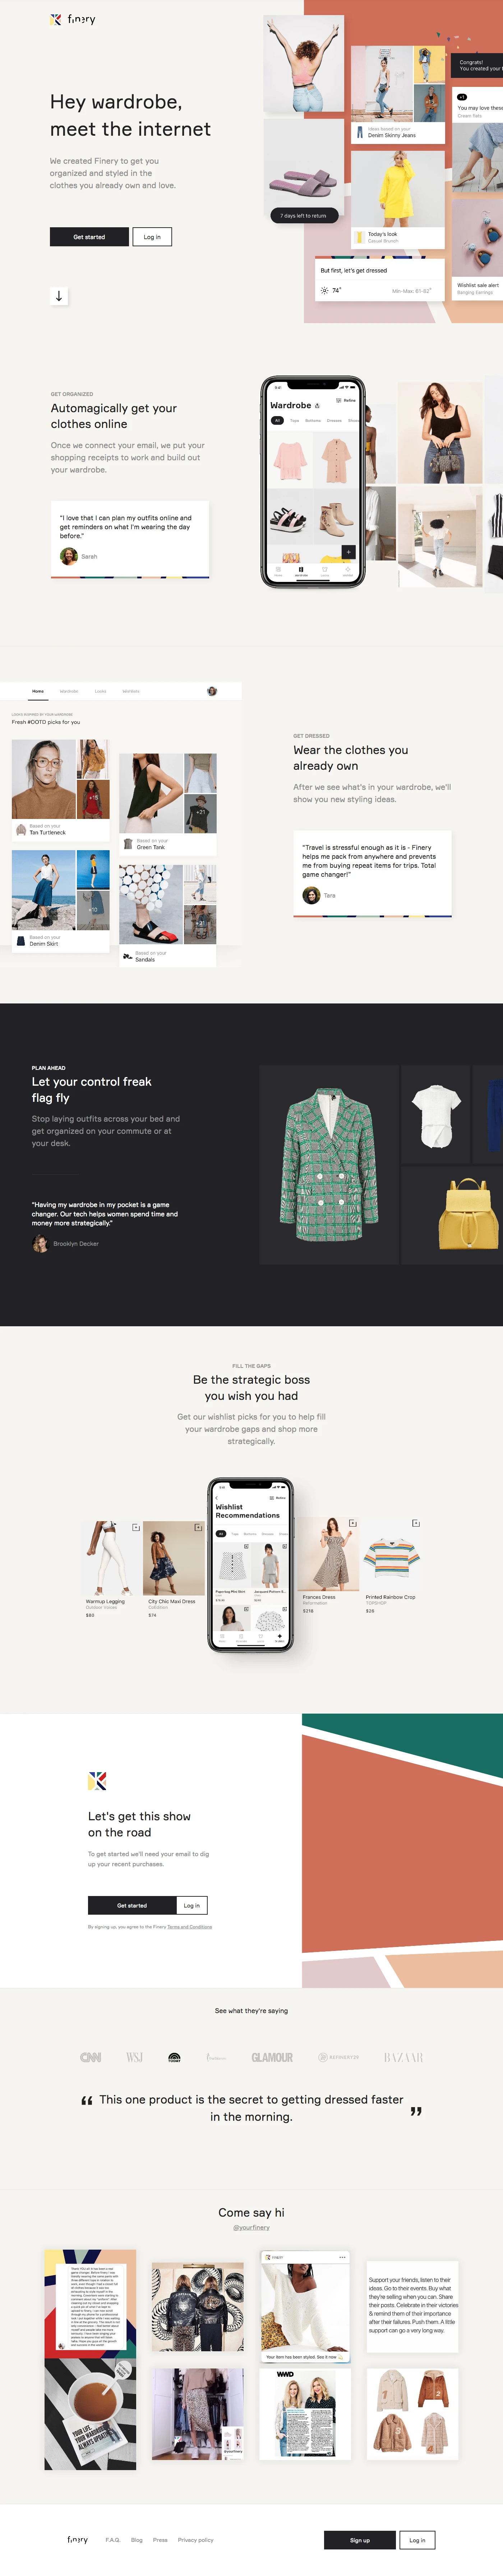 Finery Landing Page Example: The world's first operating system for your wardrobe. We created Finery to get you organized and styled in the clothes you already have and love.